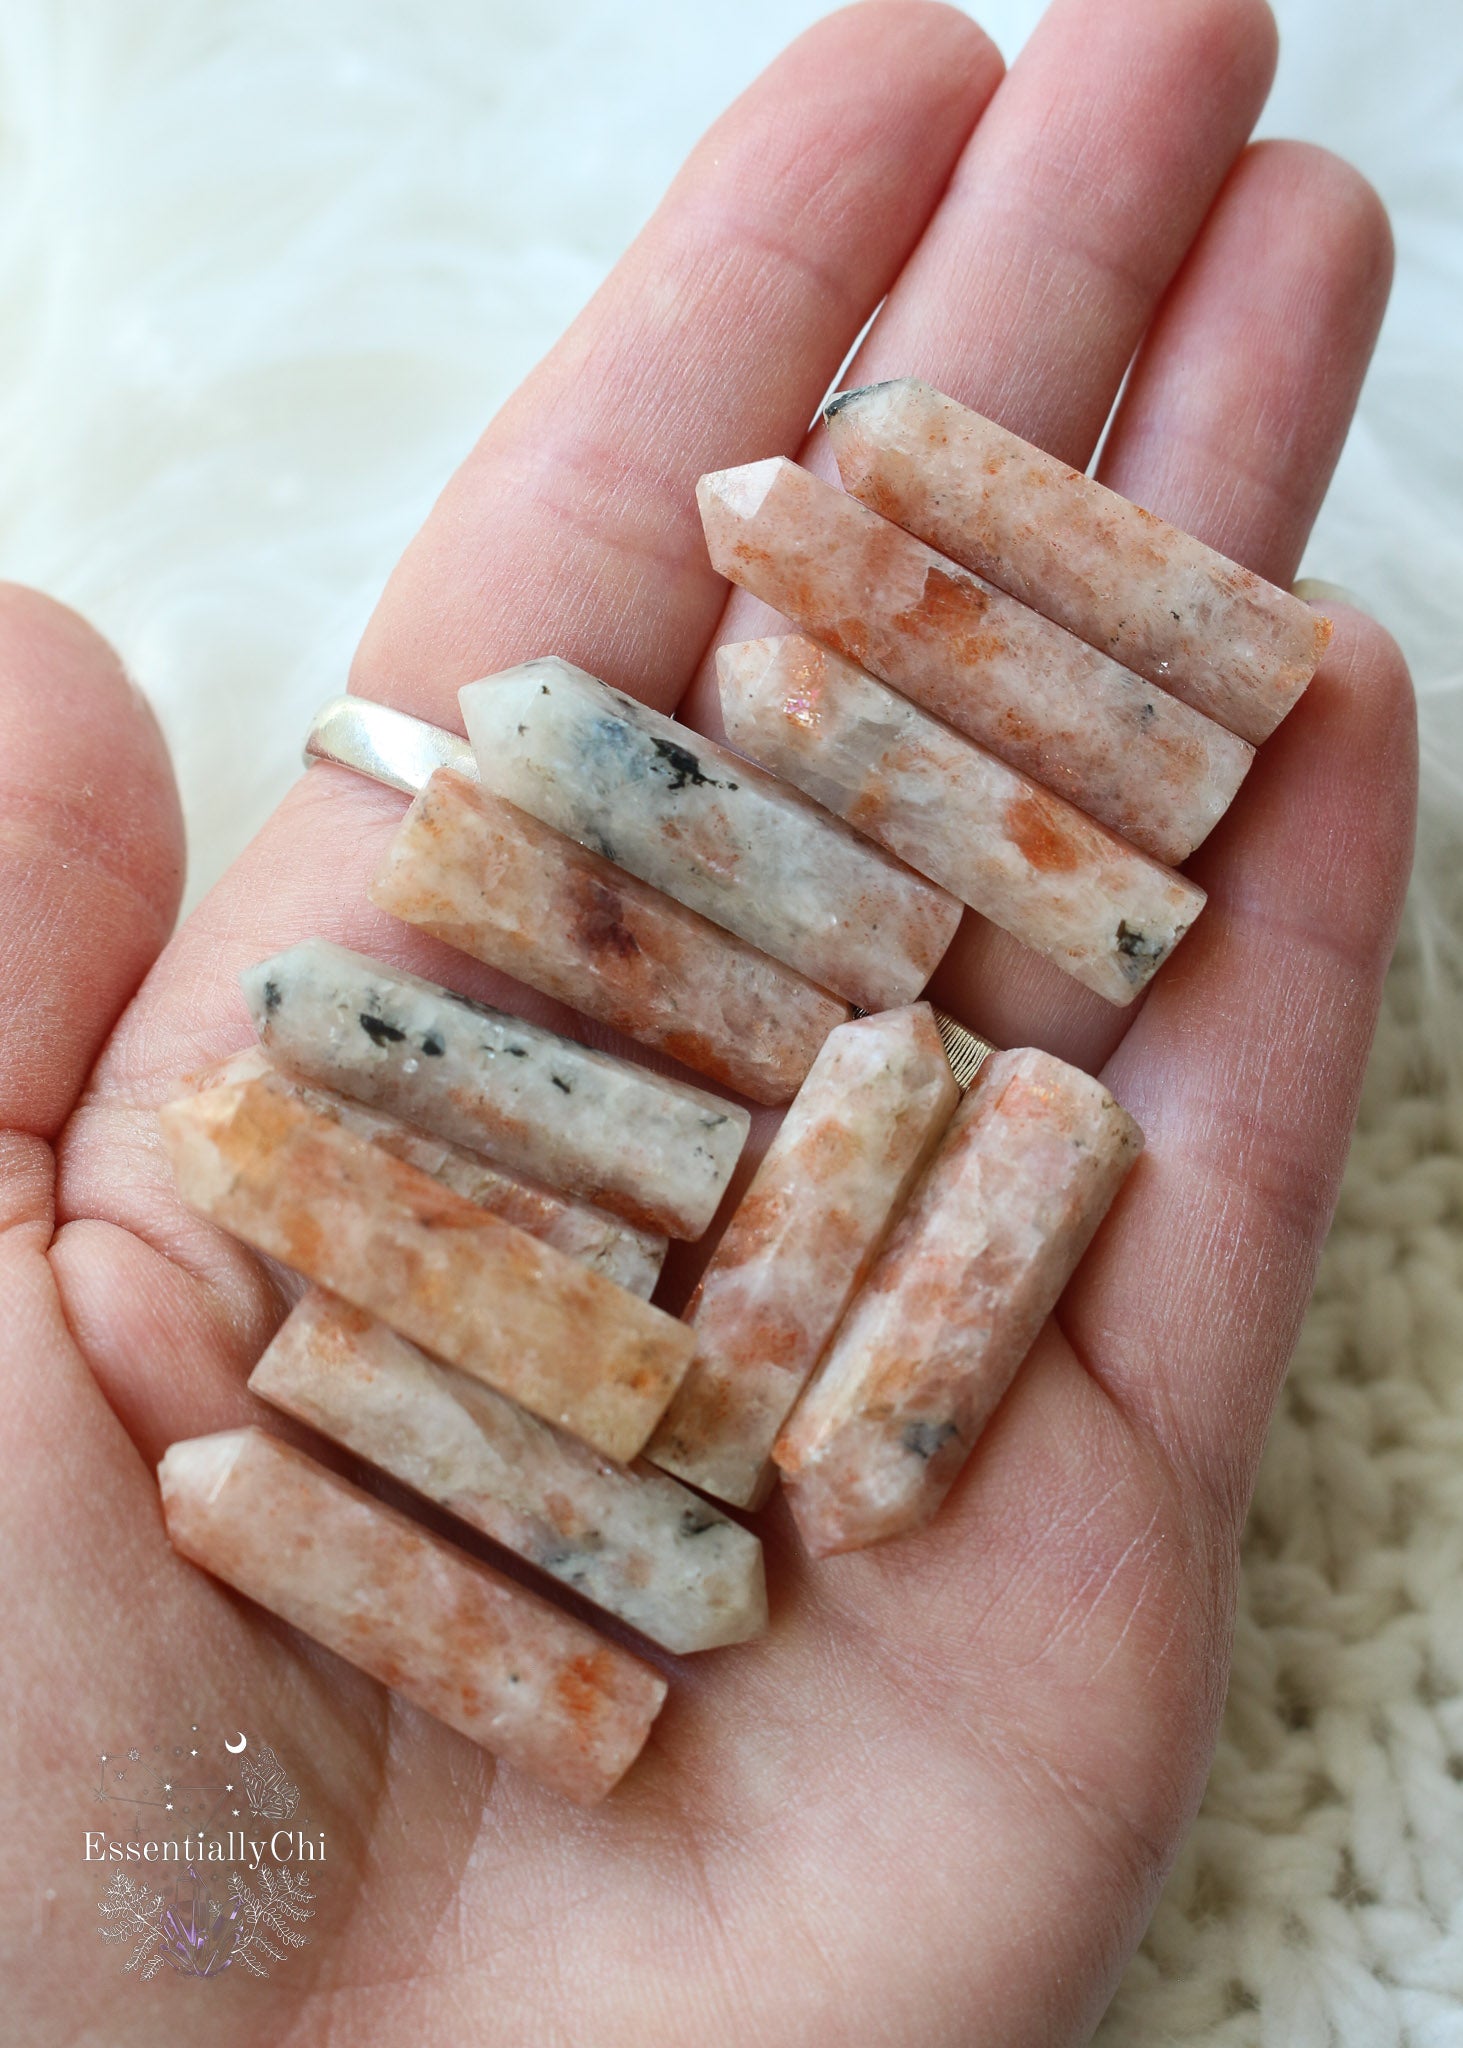 Mini sunstone points about 1" length in hand with variations of light orange with bright orange flash and black spots.